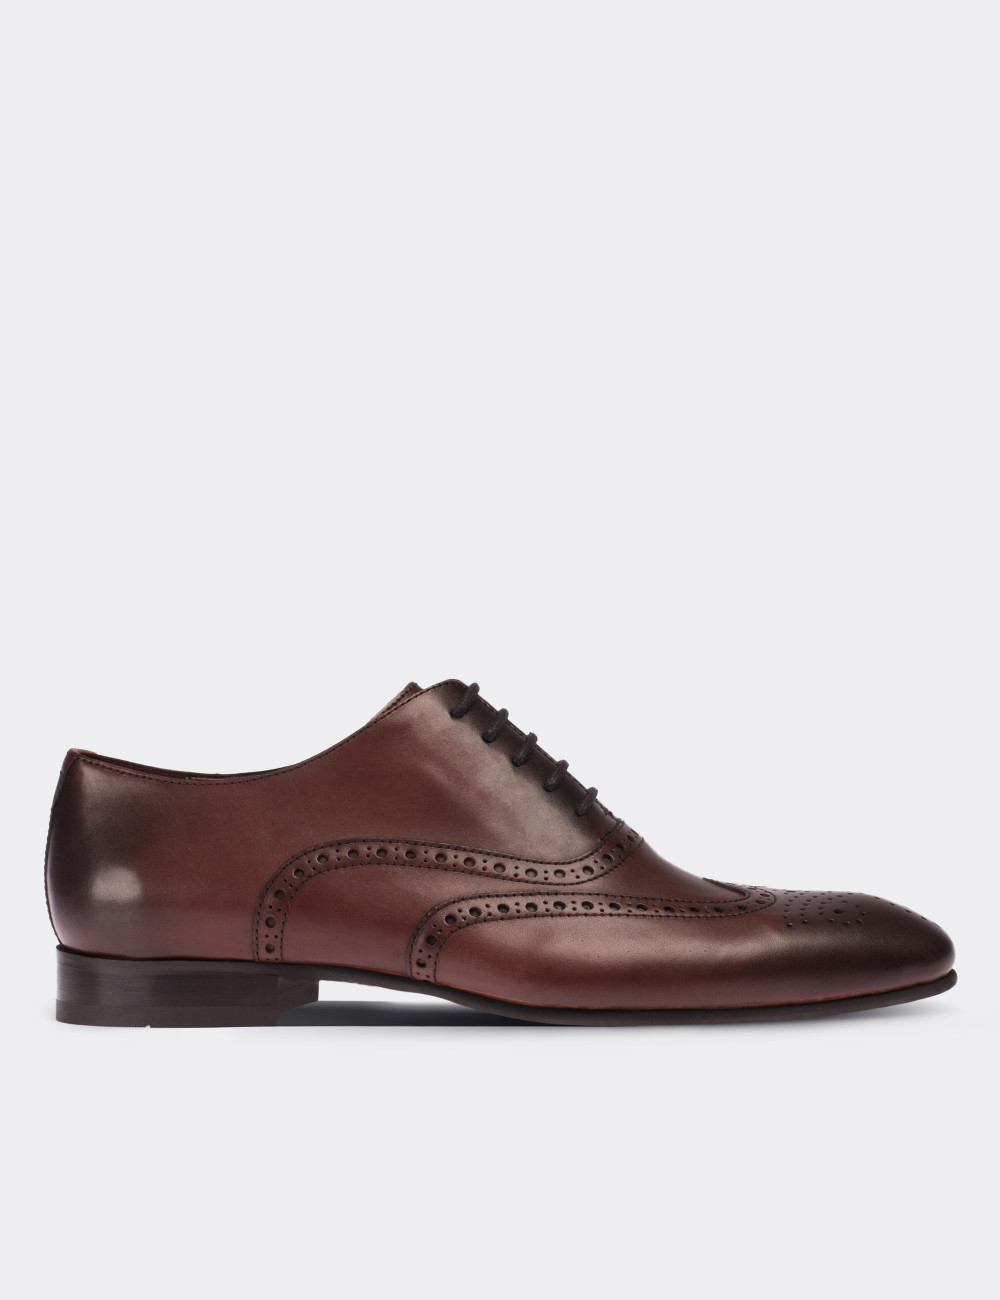 Burgundy  Leather Classic Shoes - 01785MBRDM01